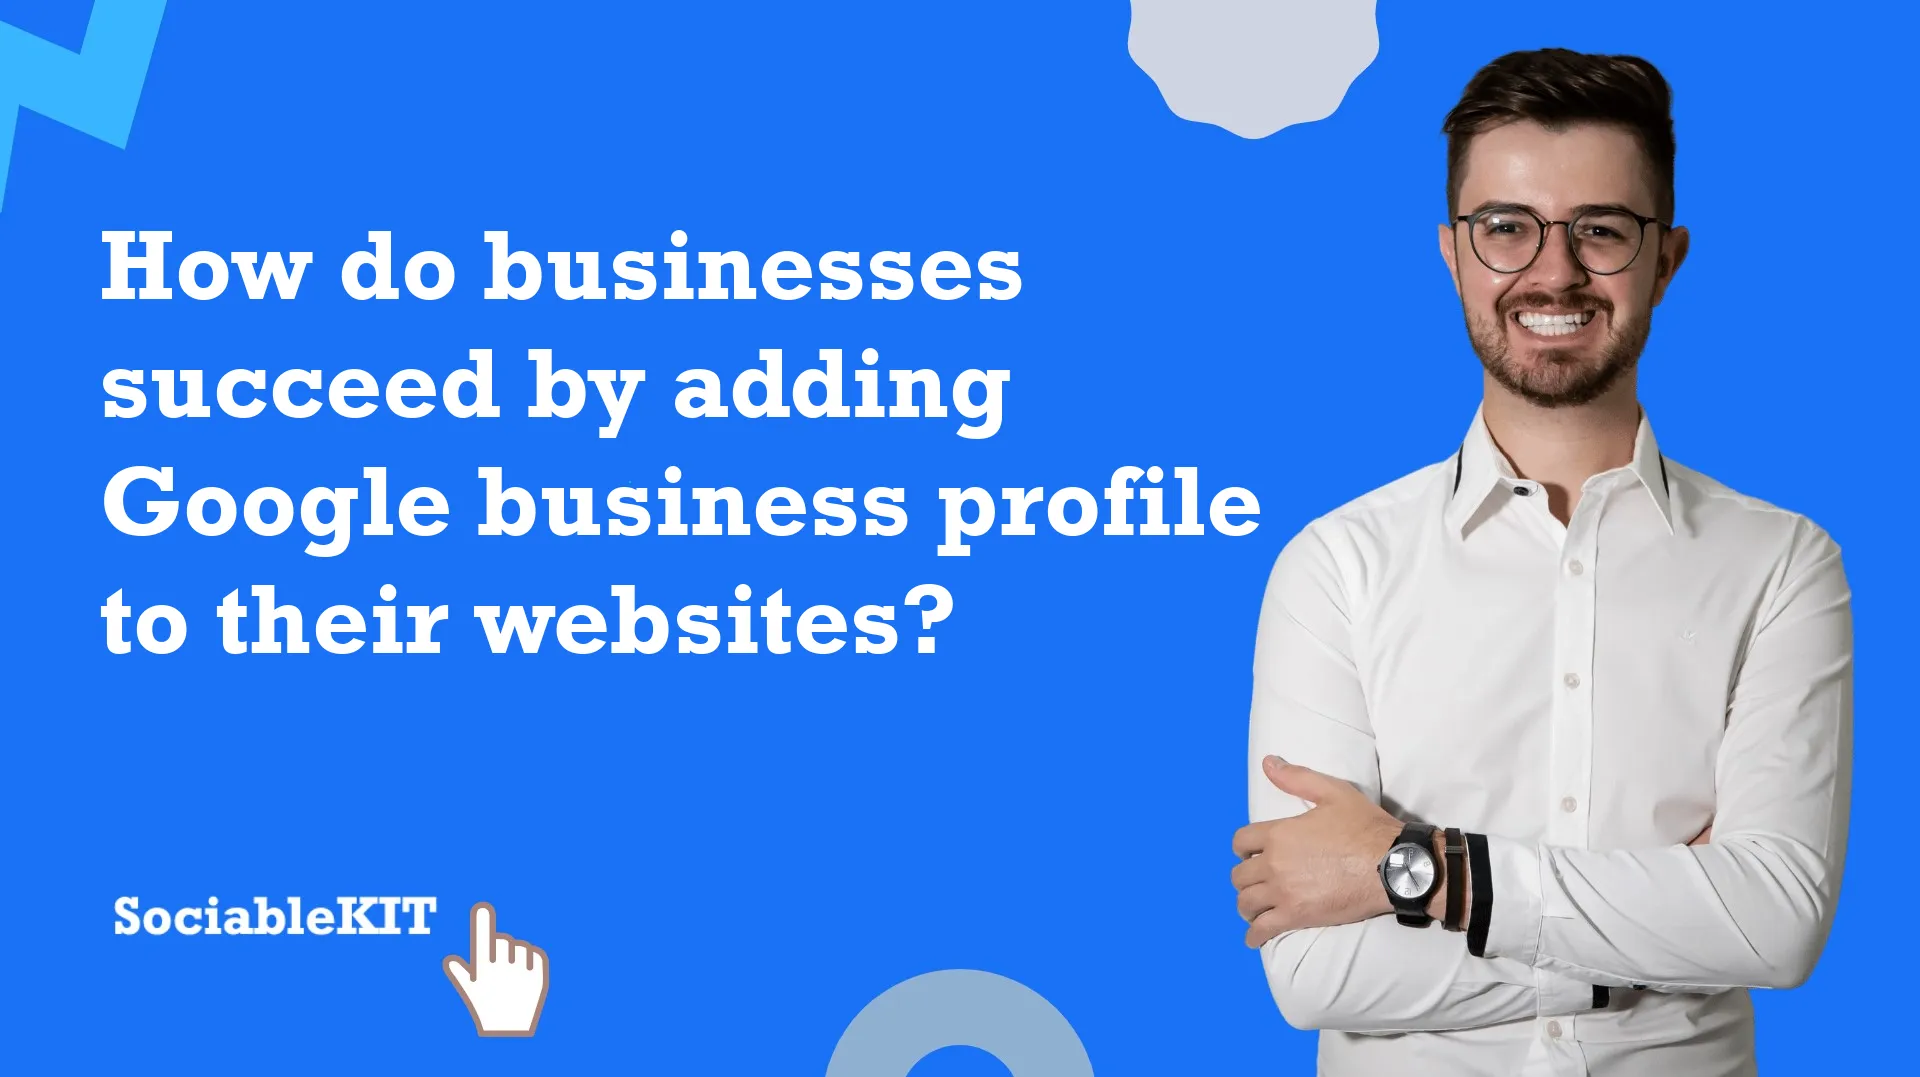 How do businesses succeed by adding Google business profile to their websites?